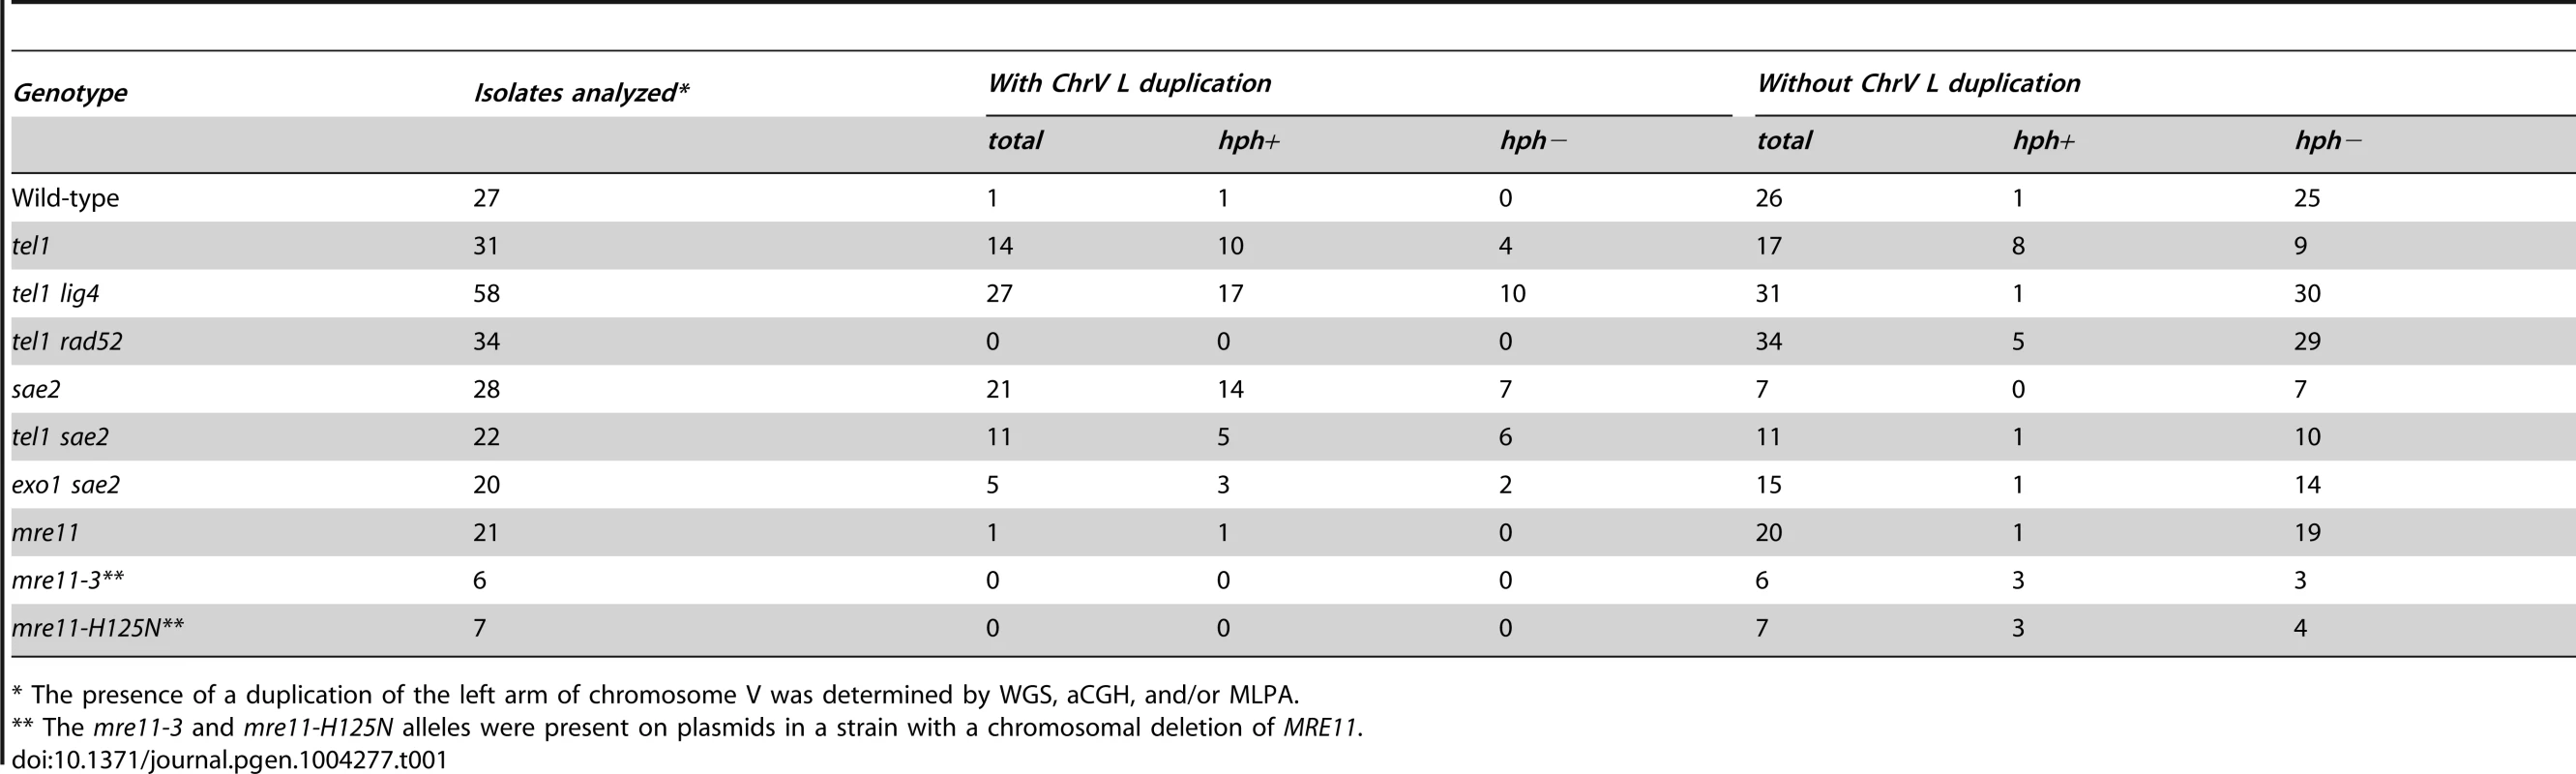 Count of GCR events with and without duplication of the left arm of chromosome V from the uGCR assay.